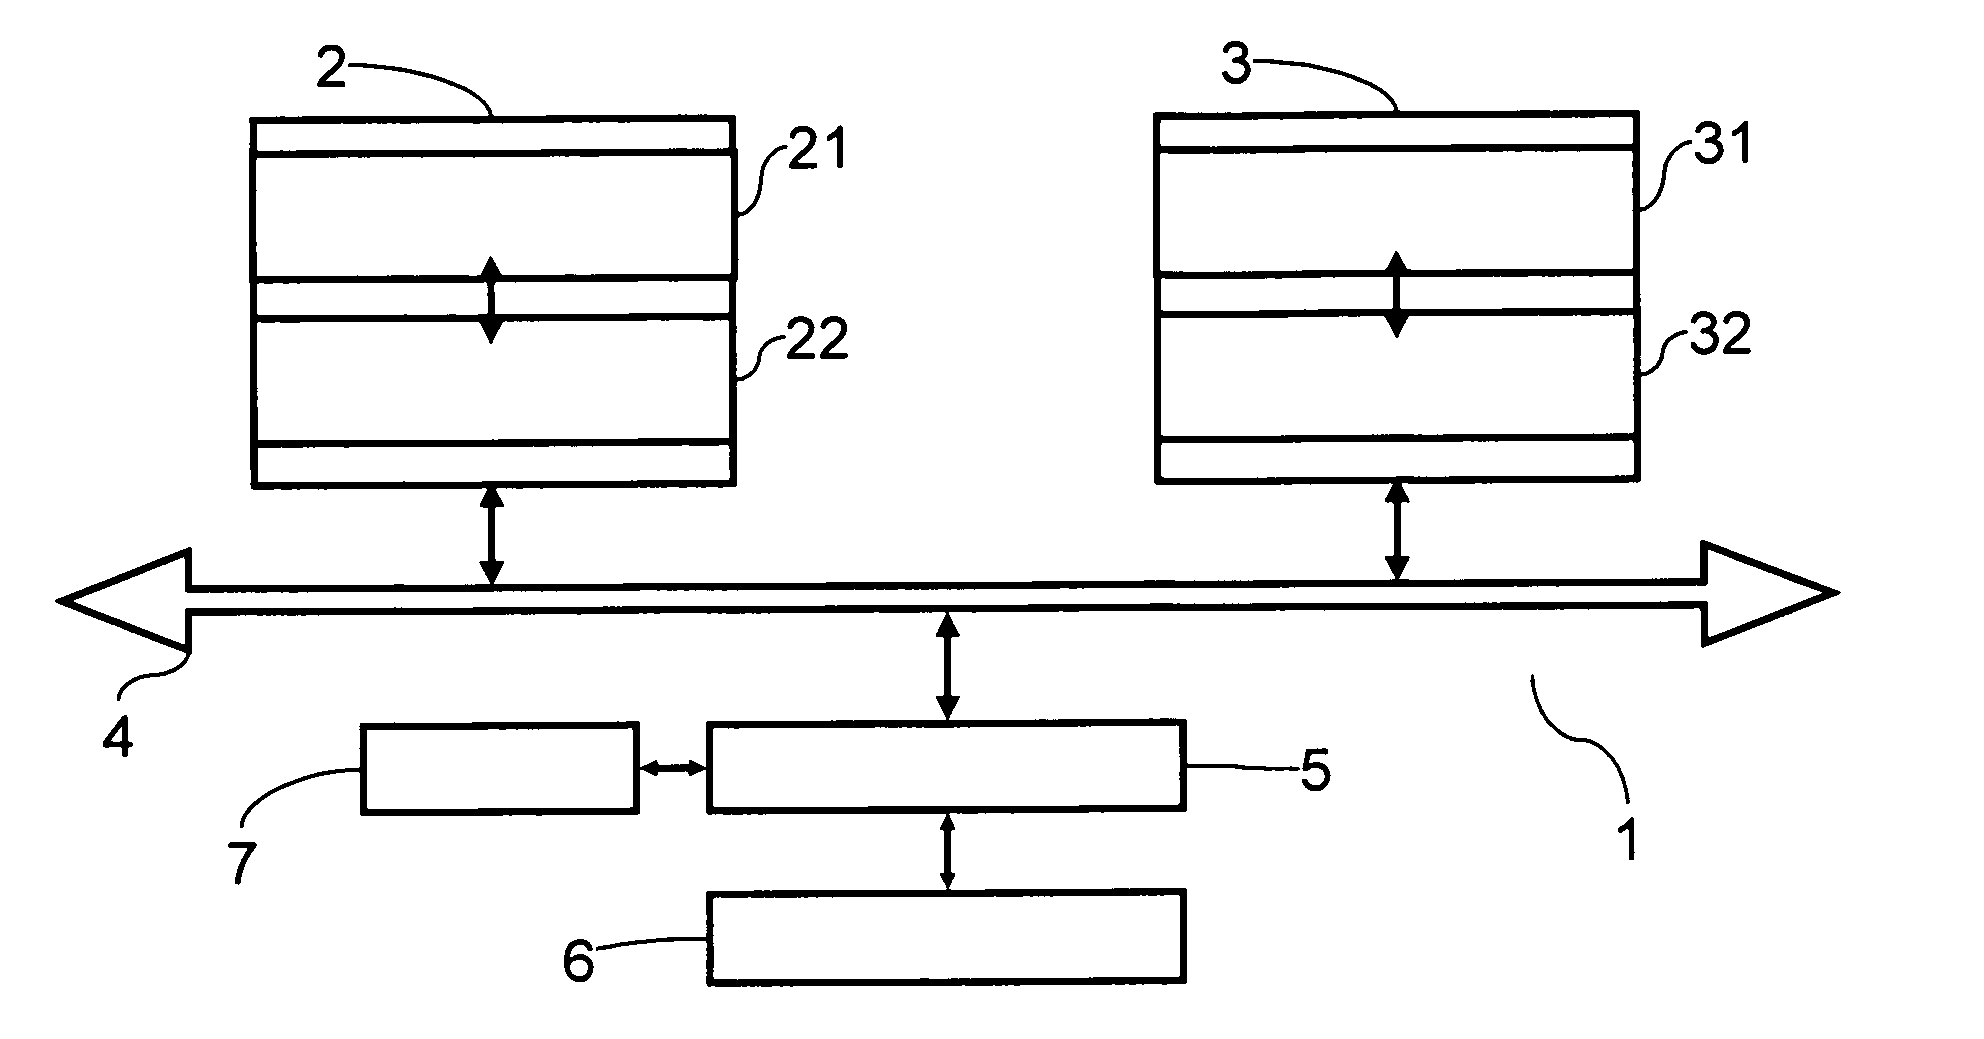 Cache coherency in a shared-memory multiprocessor system